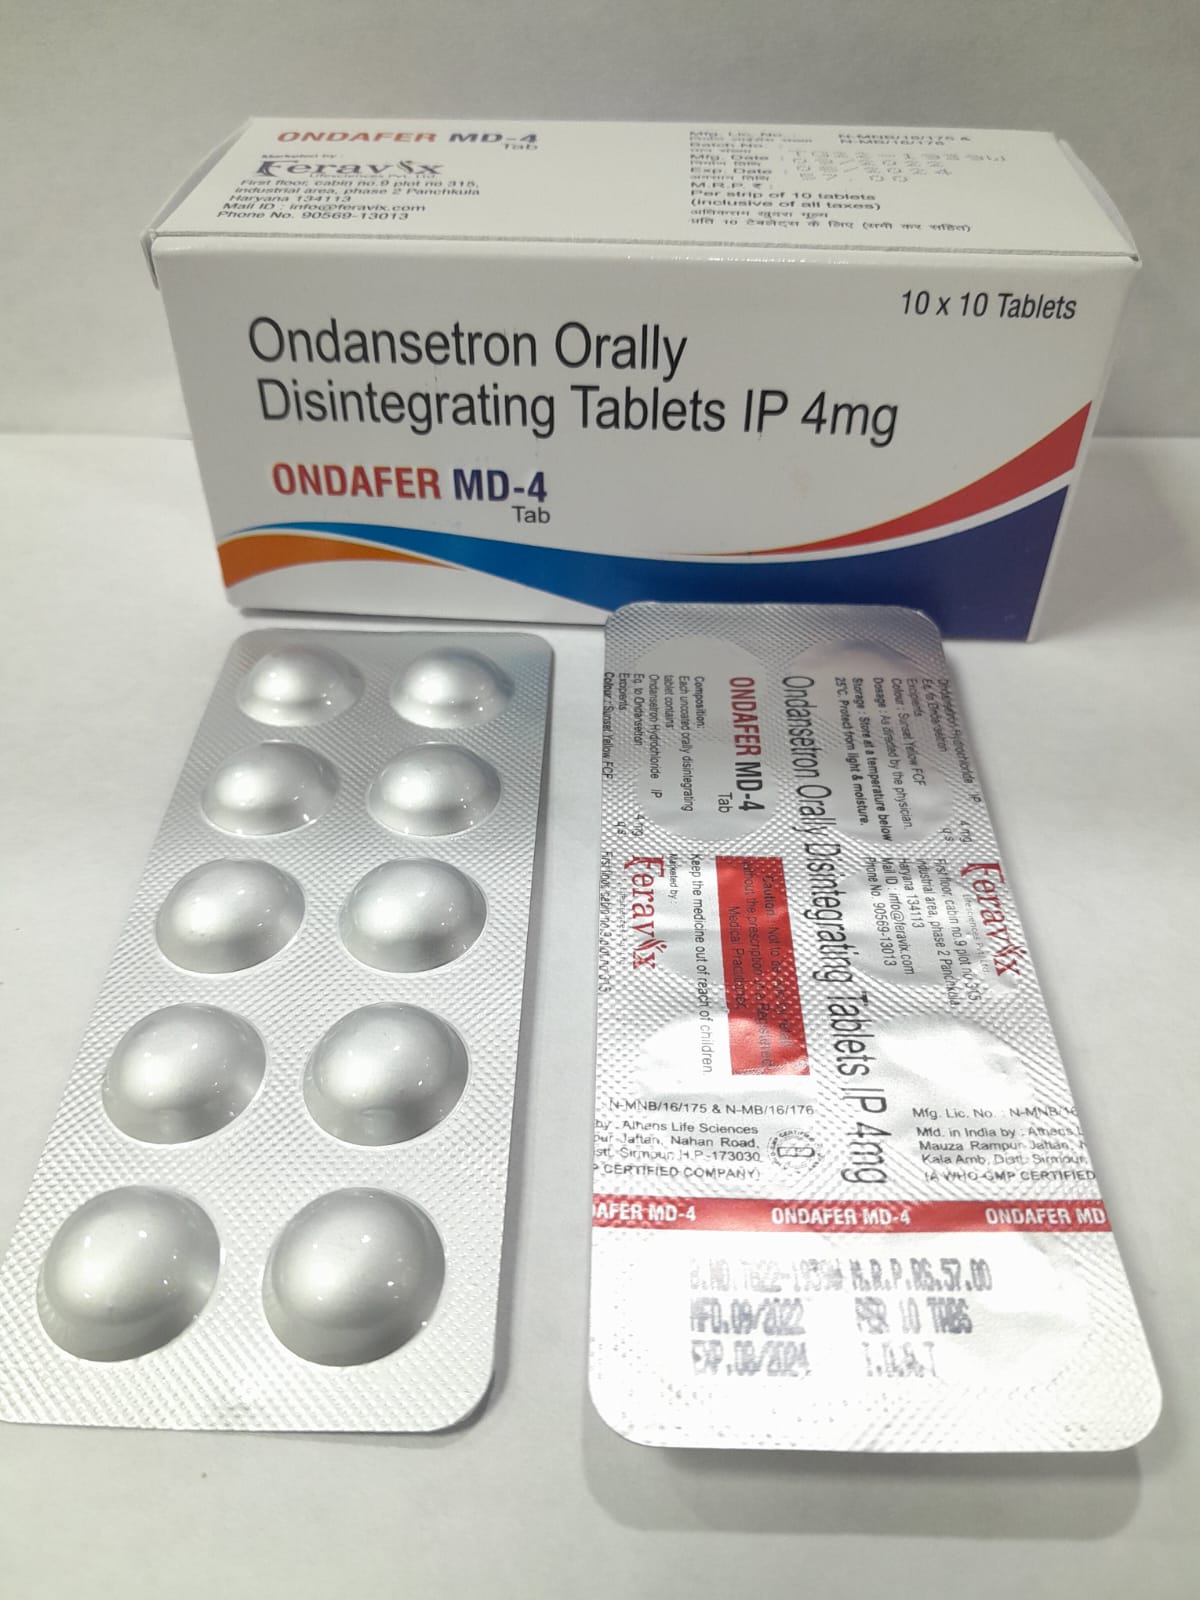 Product Name: ONDAFER MD 4, Compositions of ONDAFER MD 4 are ONDANSETRON HCL EQ. TO ONDANSETRON IP 4 MG - Feravix Lifesciences